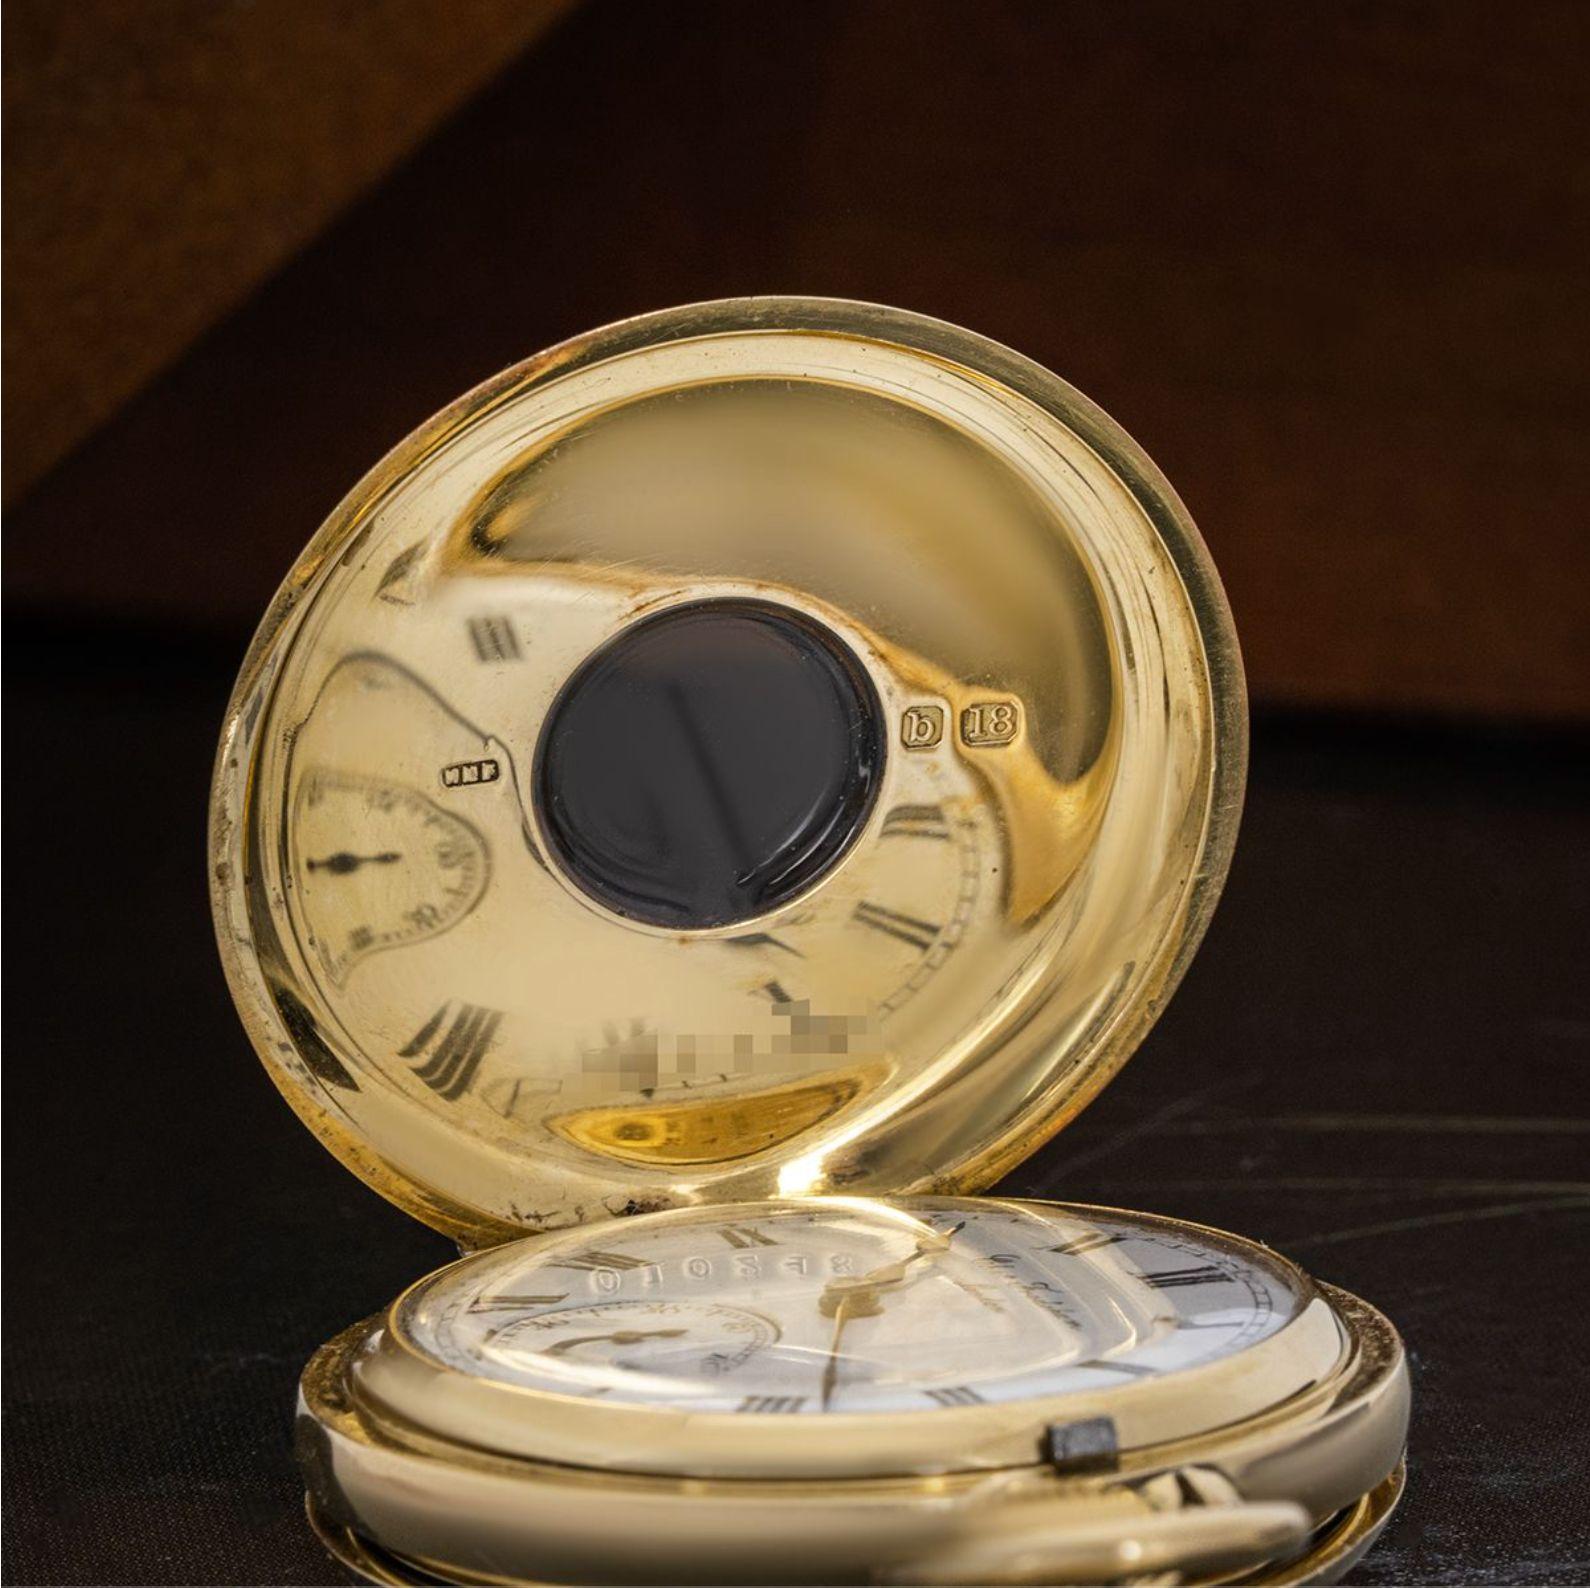 Charles Frodsham Gold Keyless Lever Half Hunter Pocket Watch C1897 In Excellent Condition For Sale In London, GB